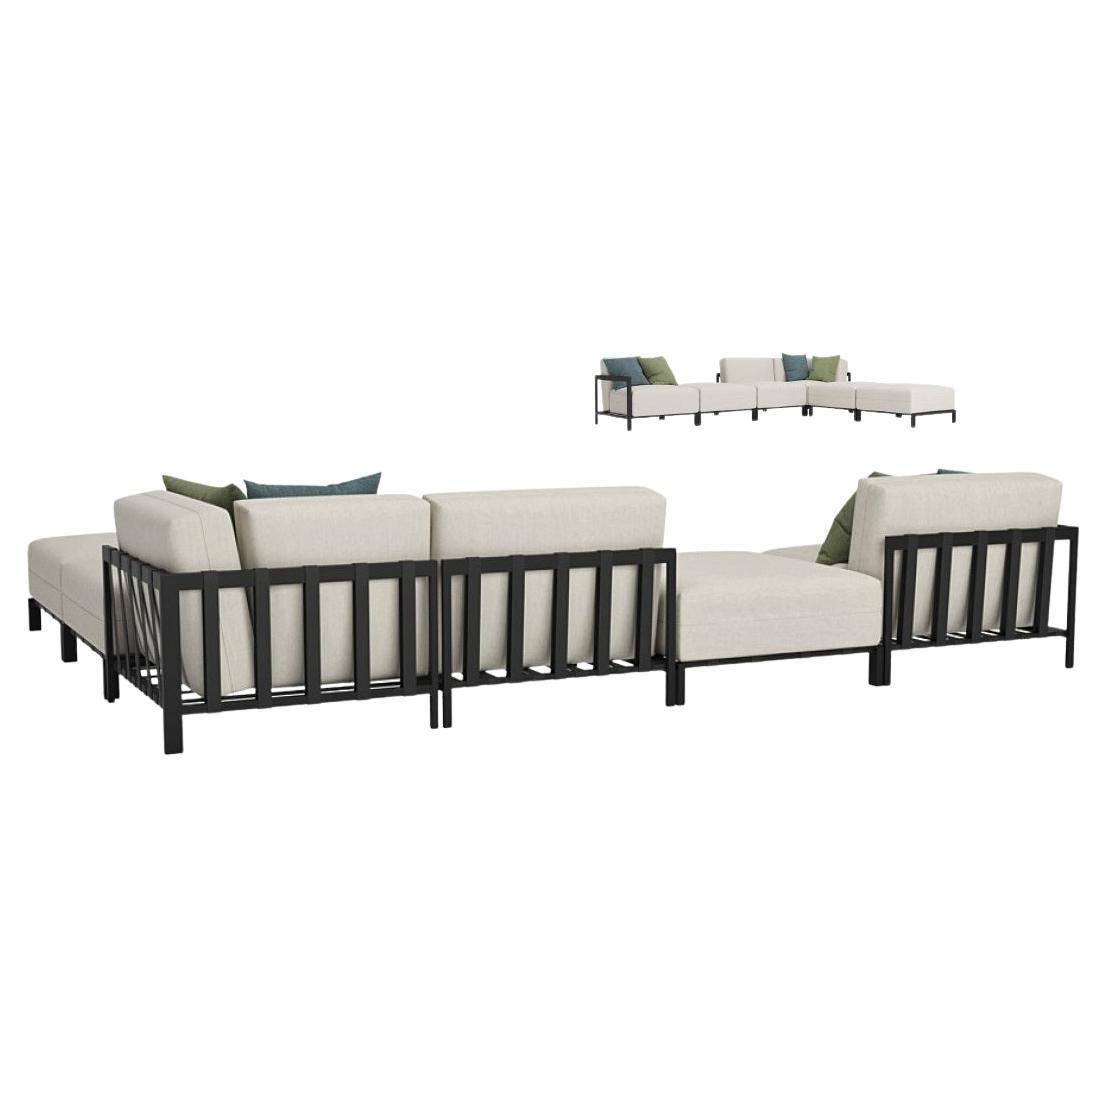 Upholstered Outdoor Sectional in Micro-Textured Stainless Steel Structure